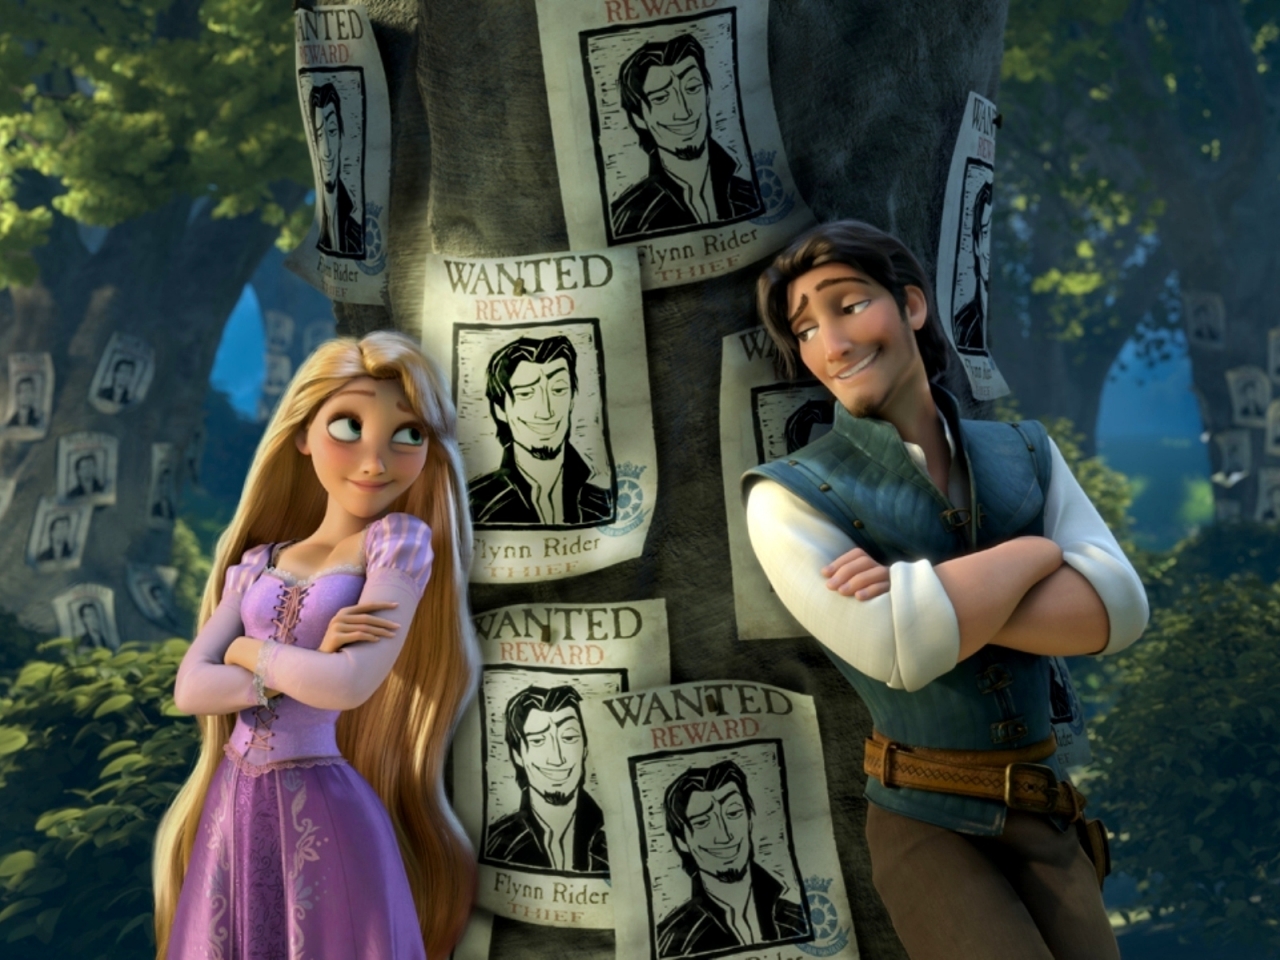 Tangled Musical for 1280 x 960 resolution